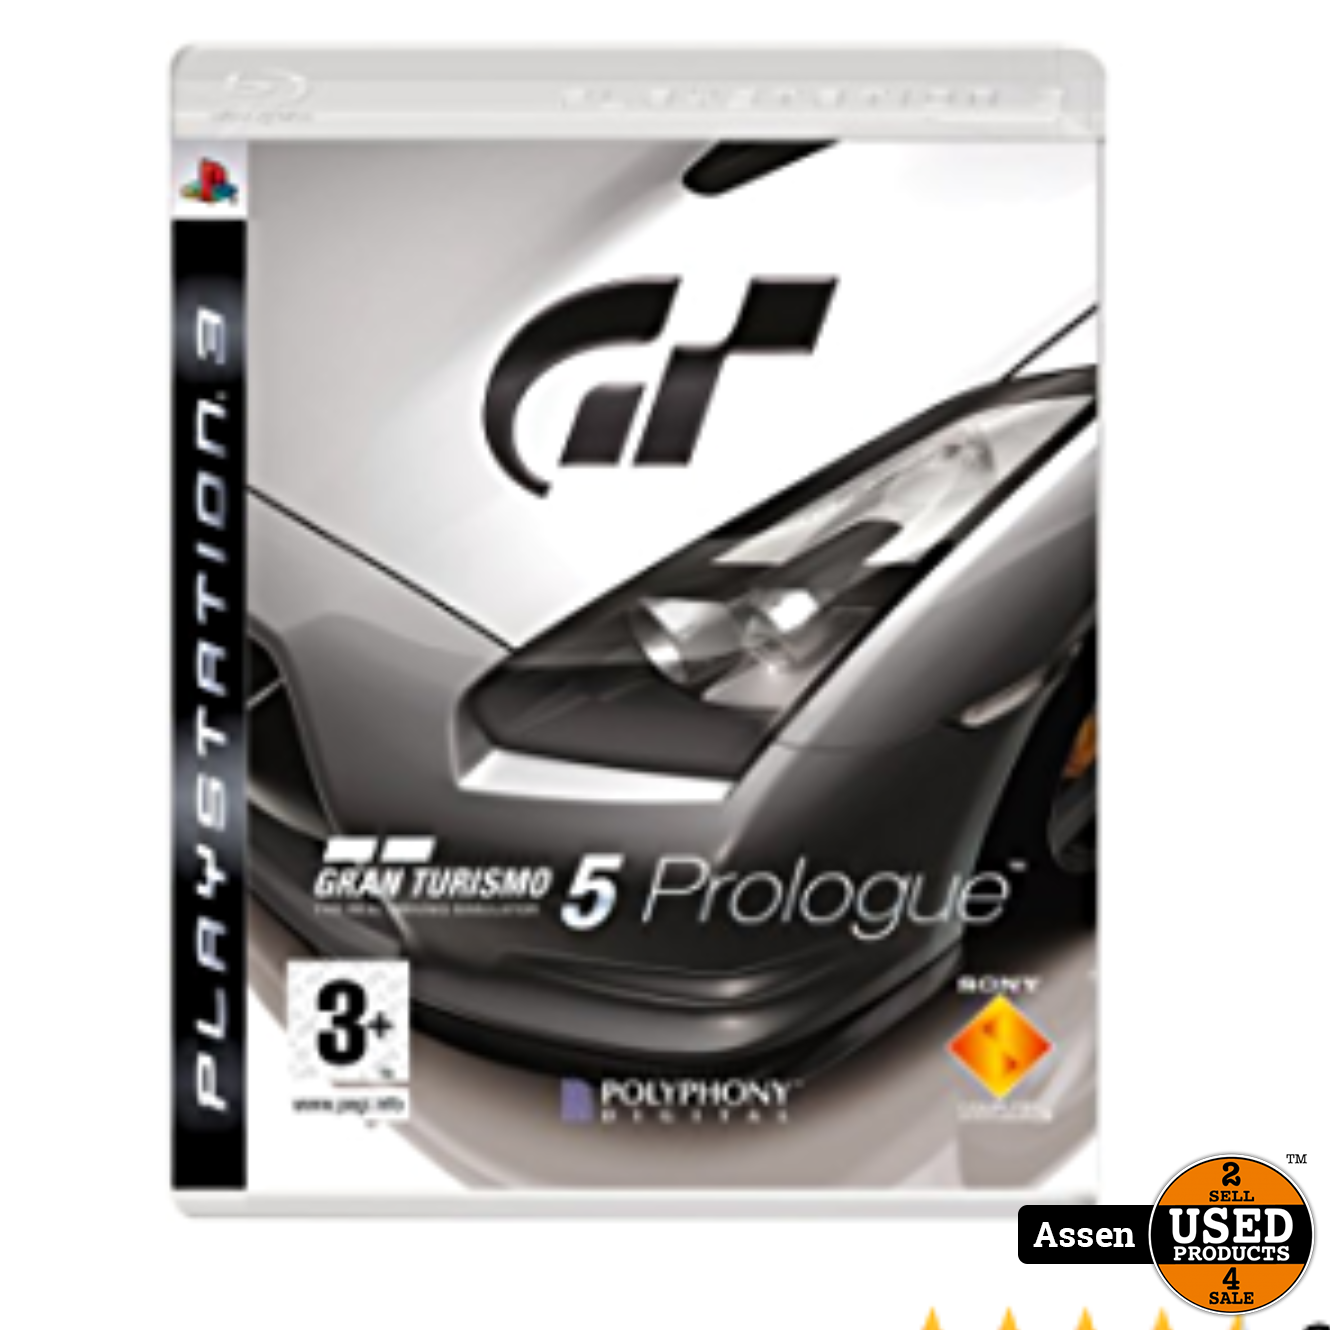 Technologie radicaal Afleiden PS3 game || Gran Turismo 5 Prologue - Used Products Assen